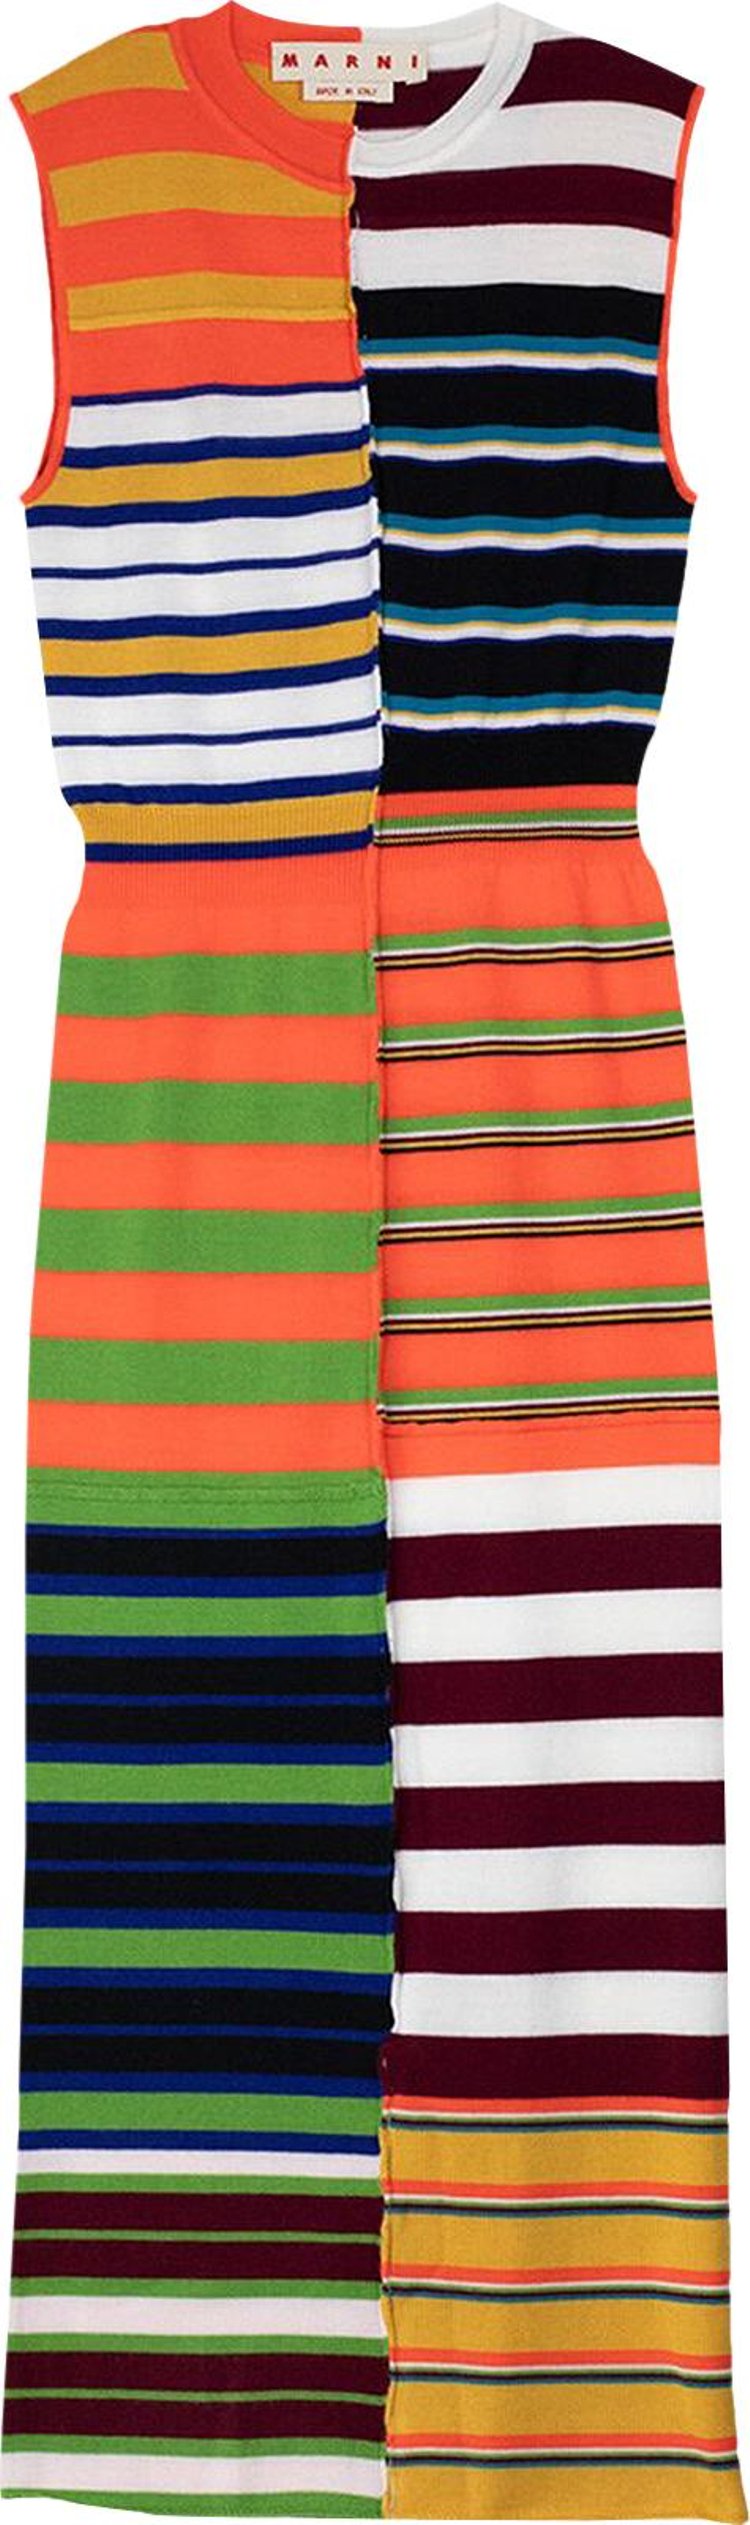 Marni Knit Dress With Patchwork Stripes 'Multicolor'